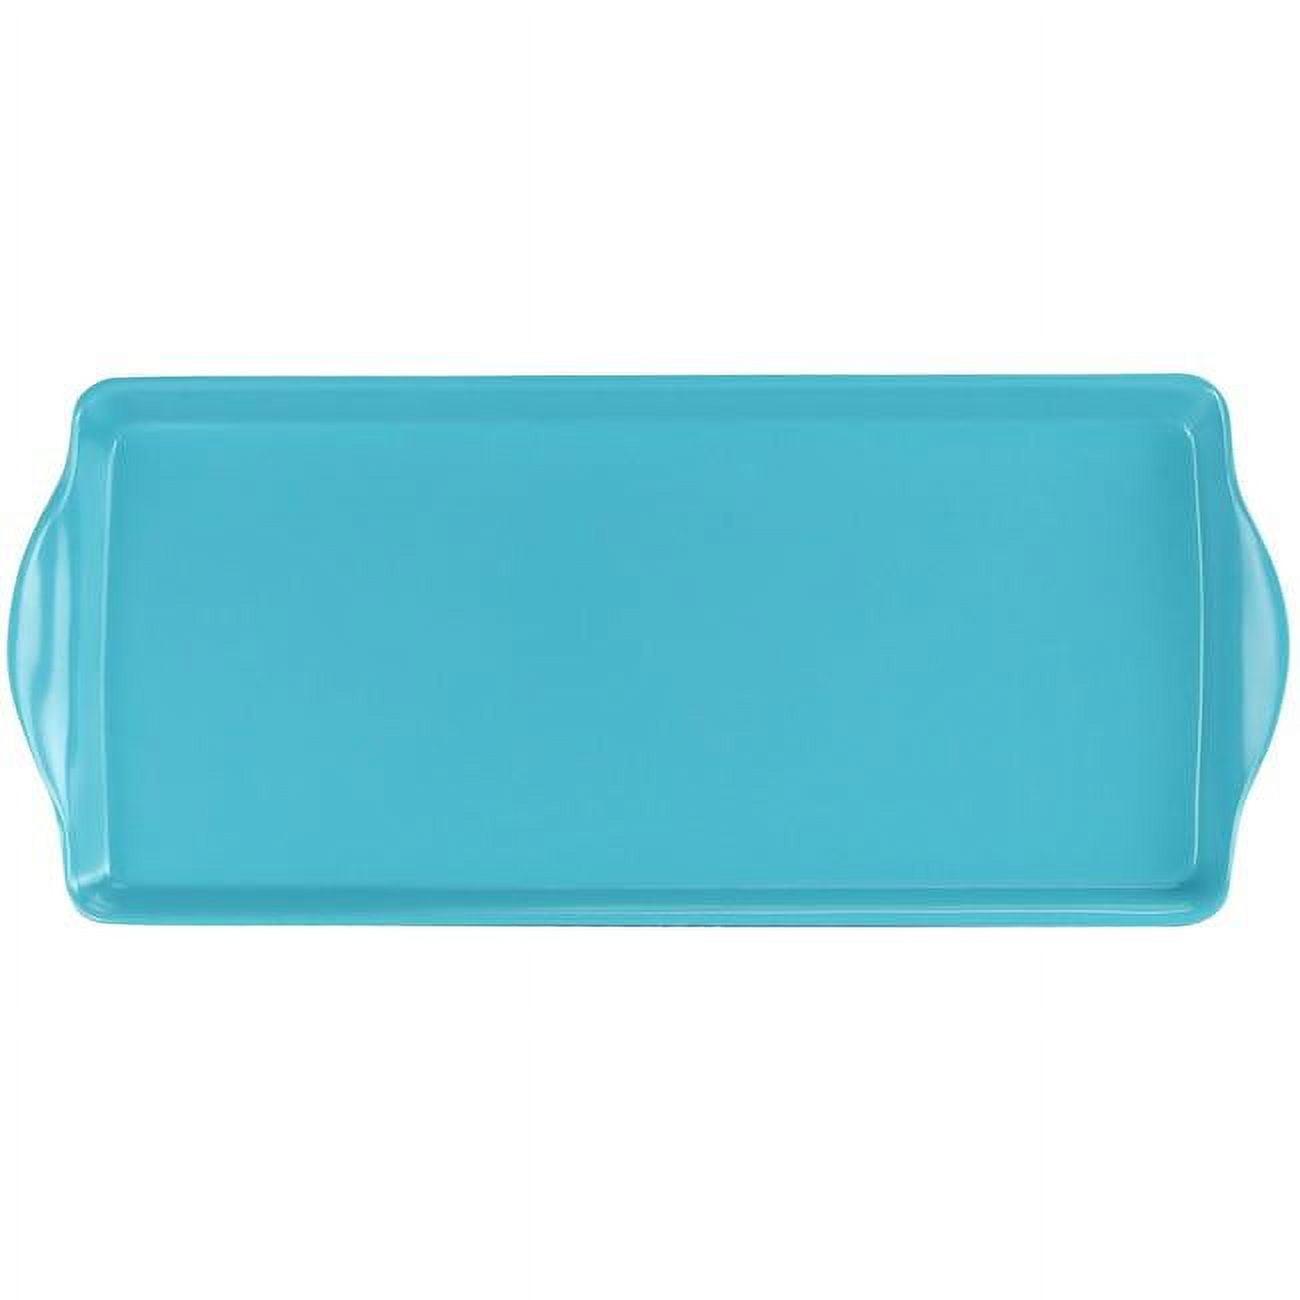 Turquoise Rectangular Melamine Serving Tray for Indoor/Outdoor